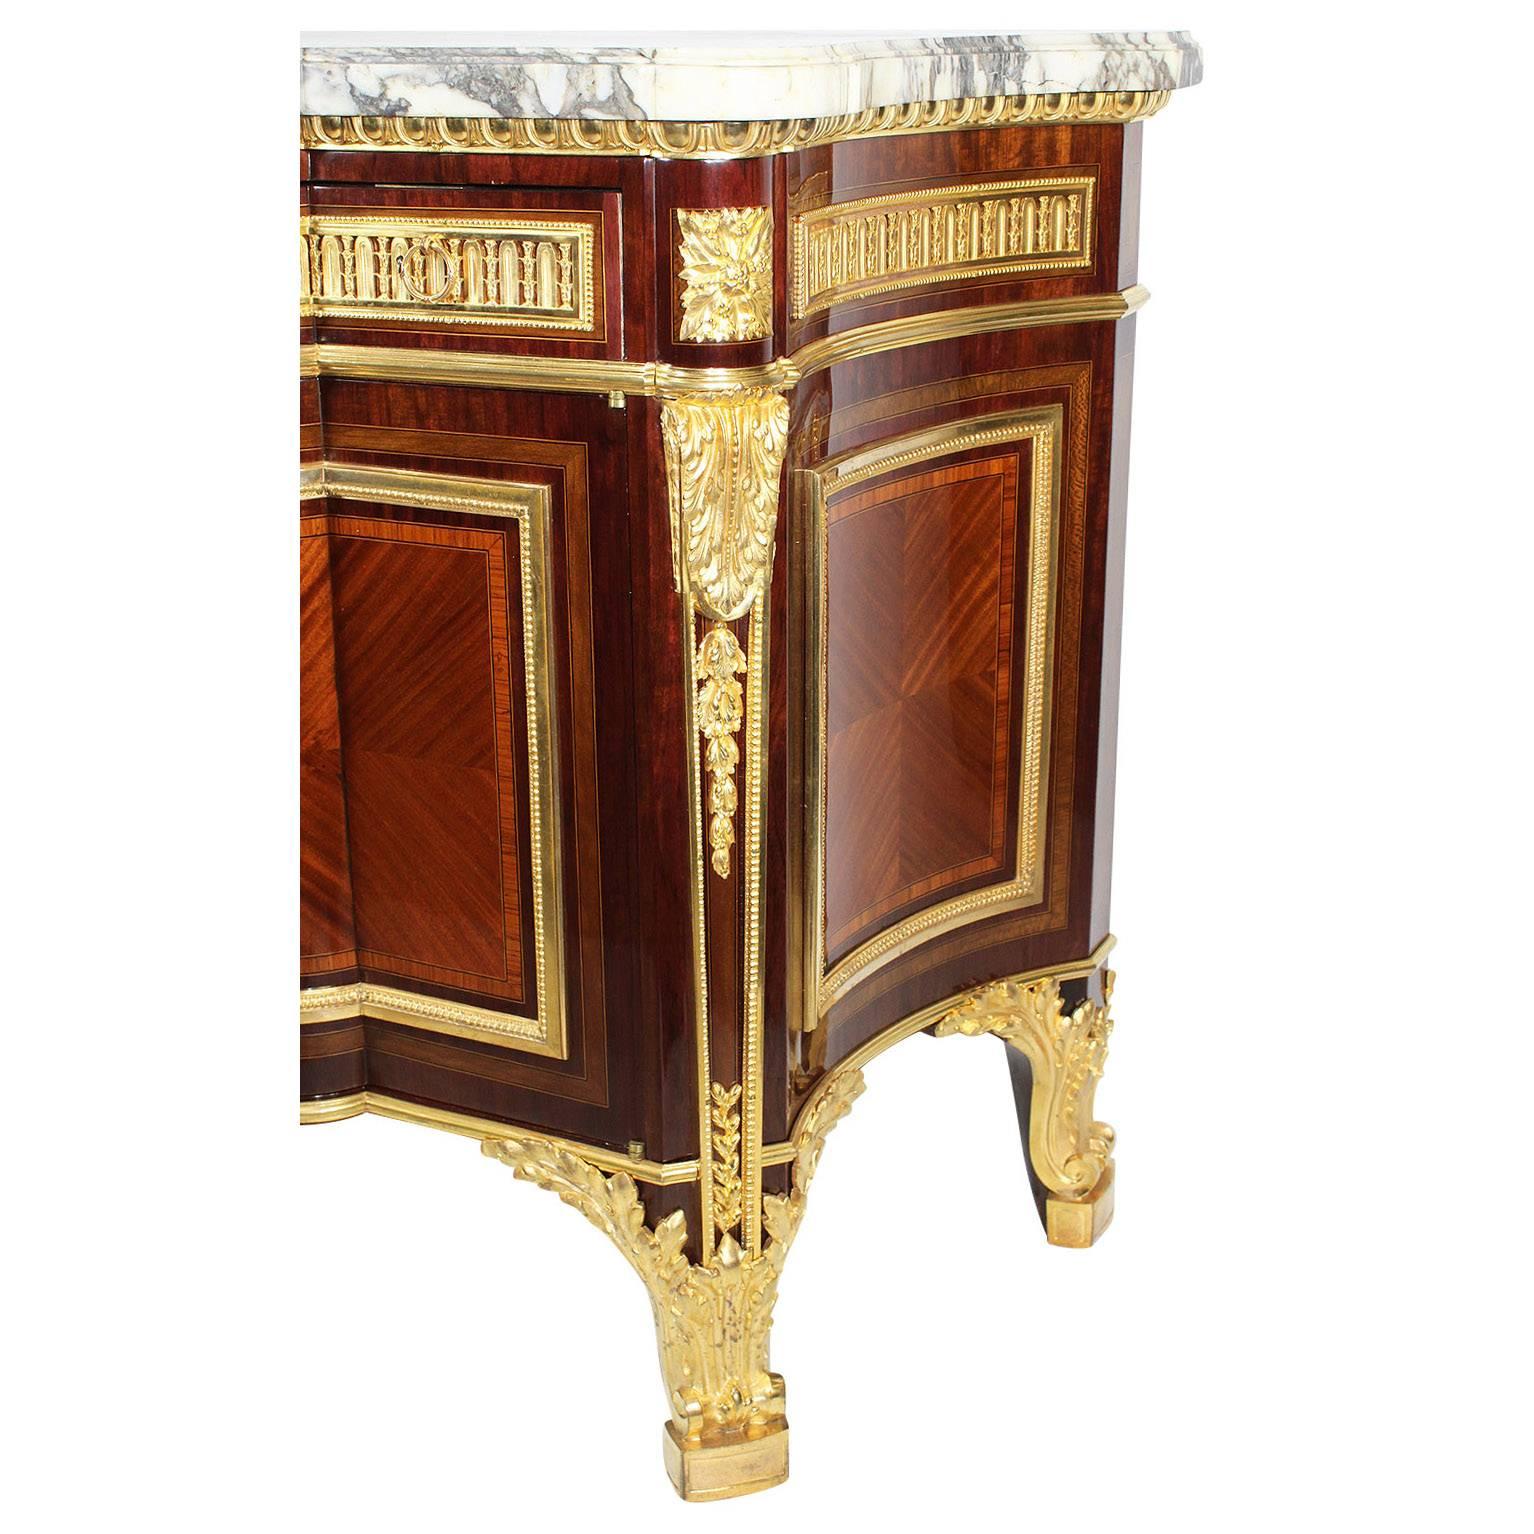 Carved Fine French 19th Century Louis XVI Style Ormolu-Mounted Tulipwood Commode For Sale